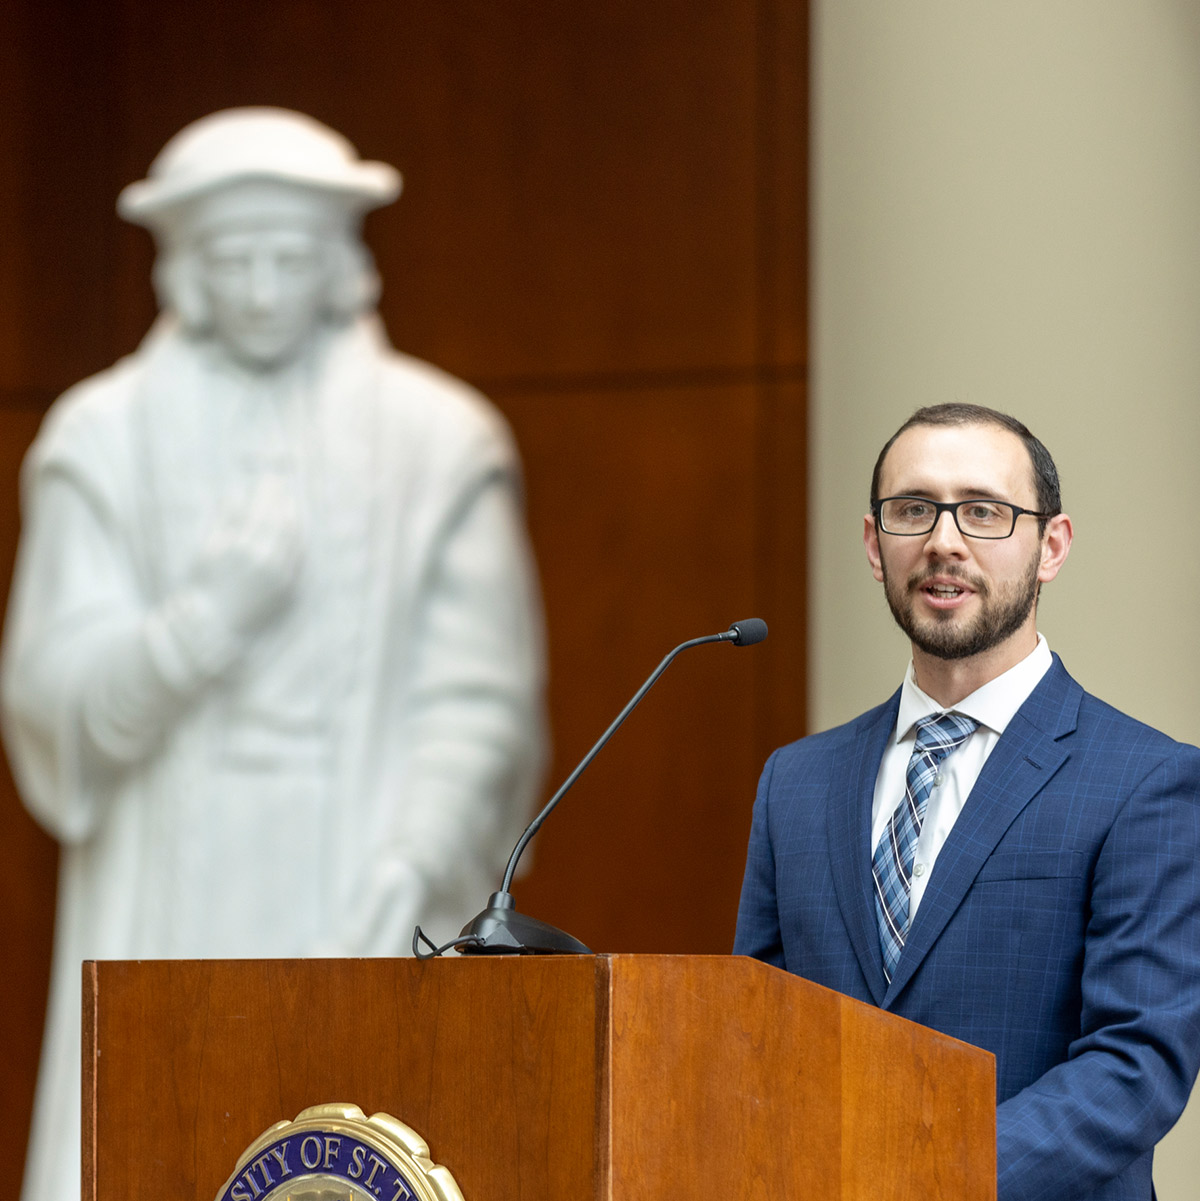  Andrew Rydlund speaking at the School of Law Mission Awards ceremony